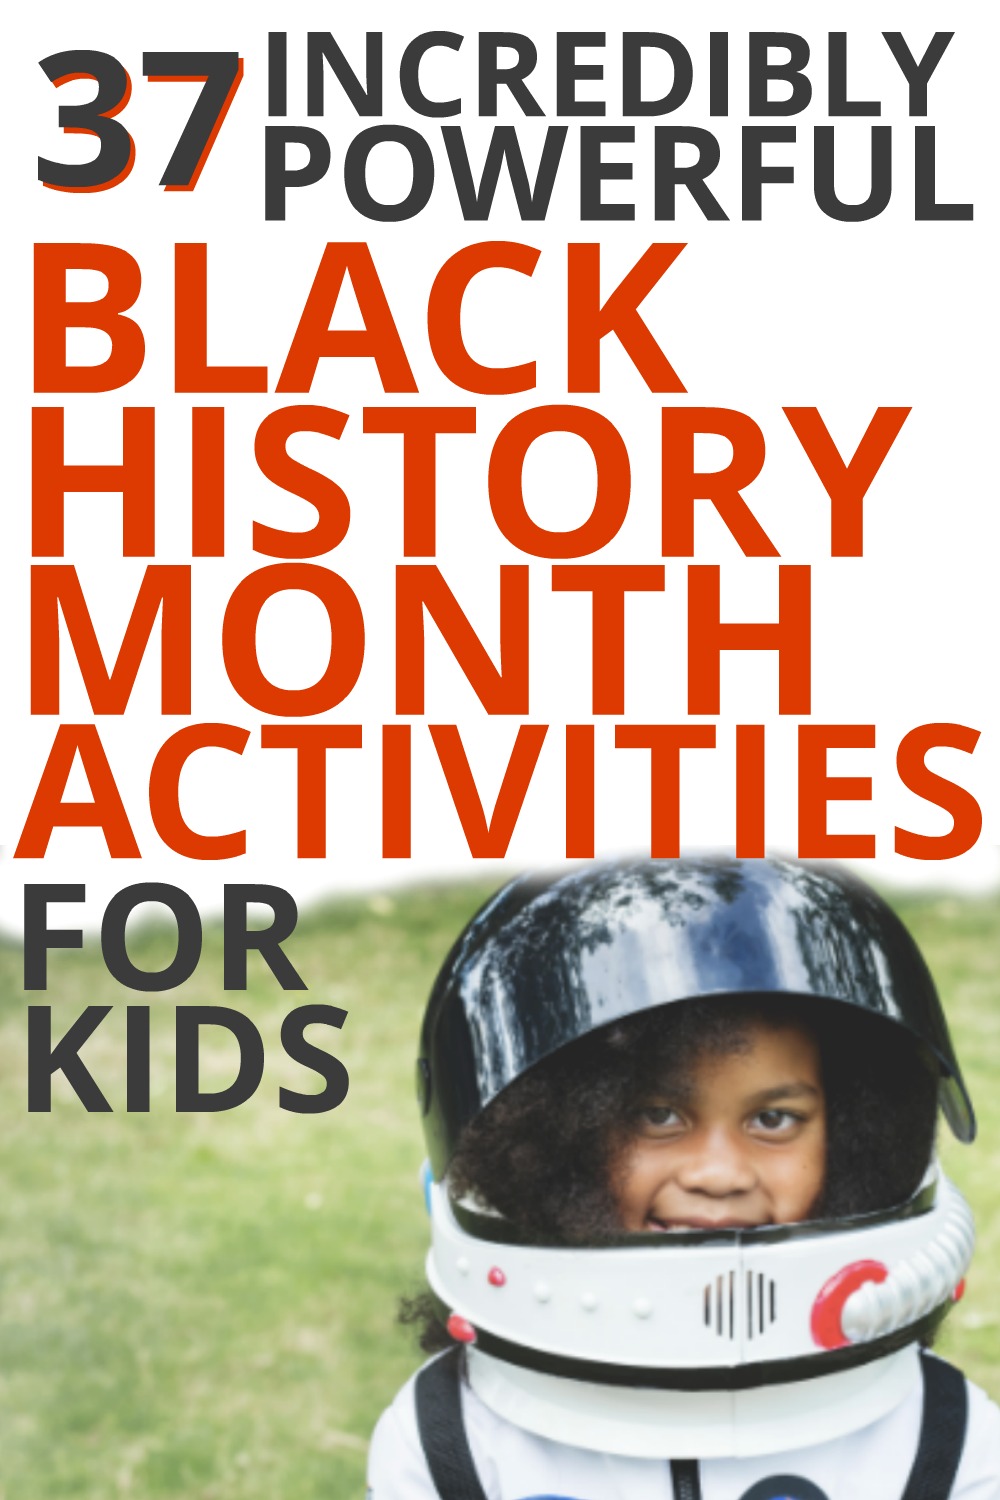 BLACK HISTORY MONTH ACTIVITIES FOR KIDS (great for February themes for preschool and up): 37 Incredibly Powerful Black History Month Activities for Kids text over a picture of a smiling african american girl wearing an astronaut costume and Black children in fun costume